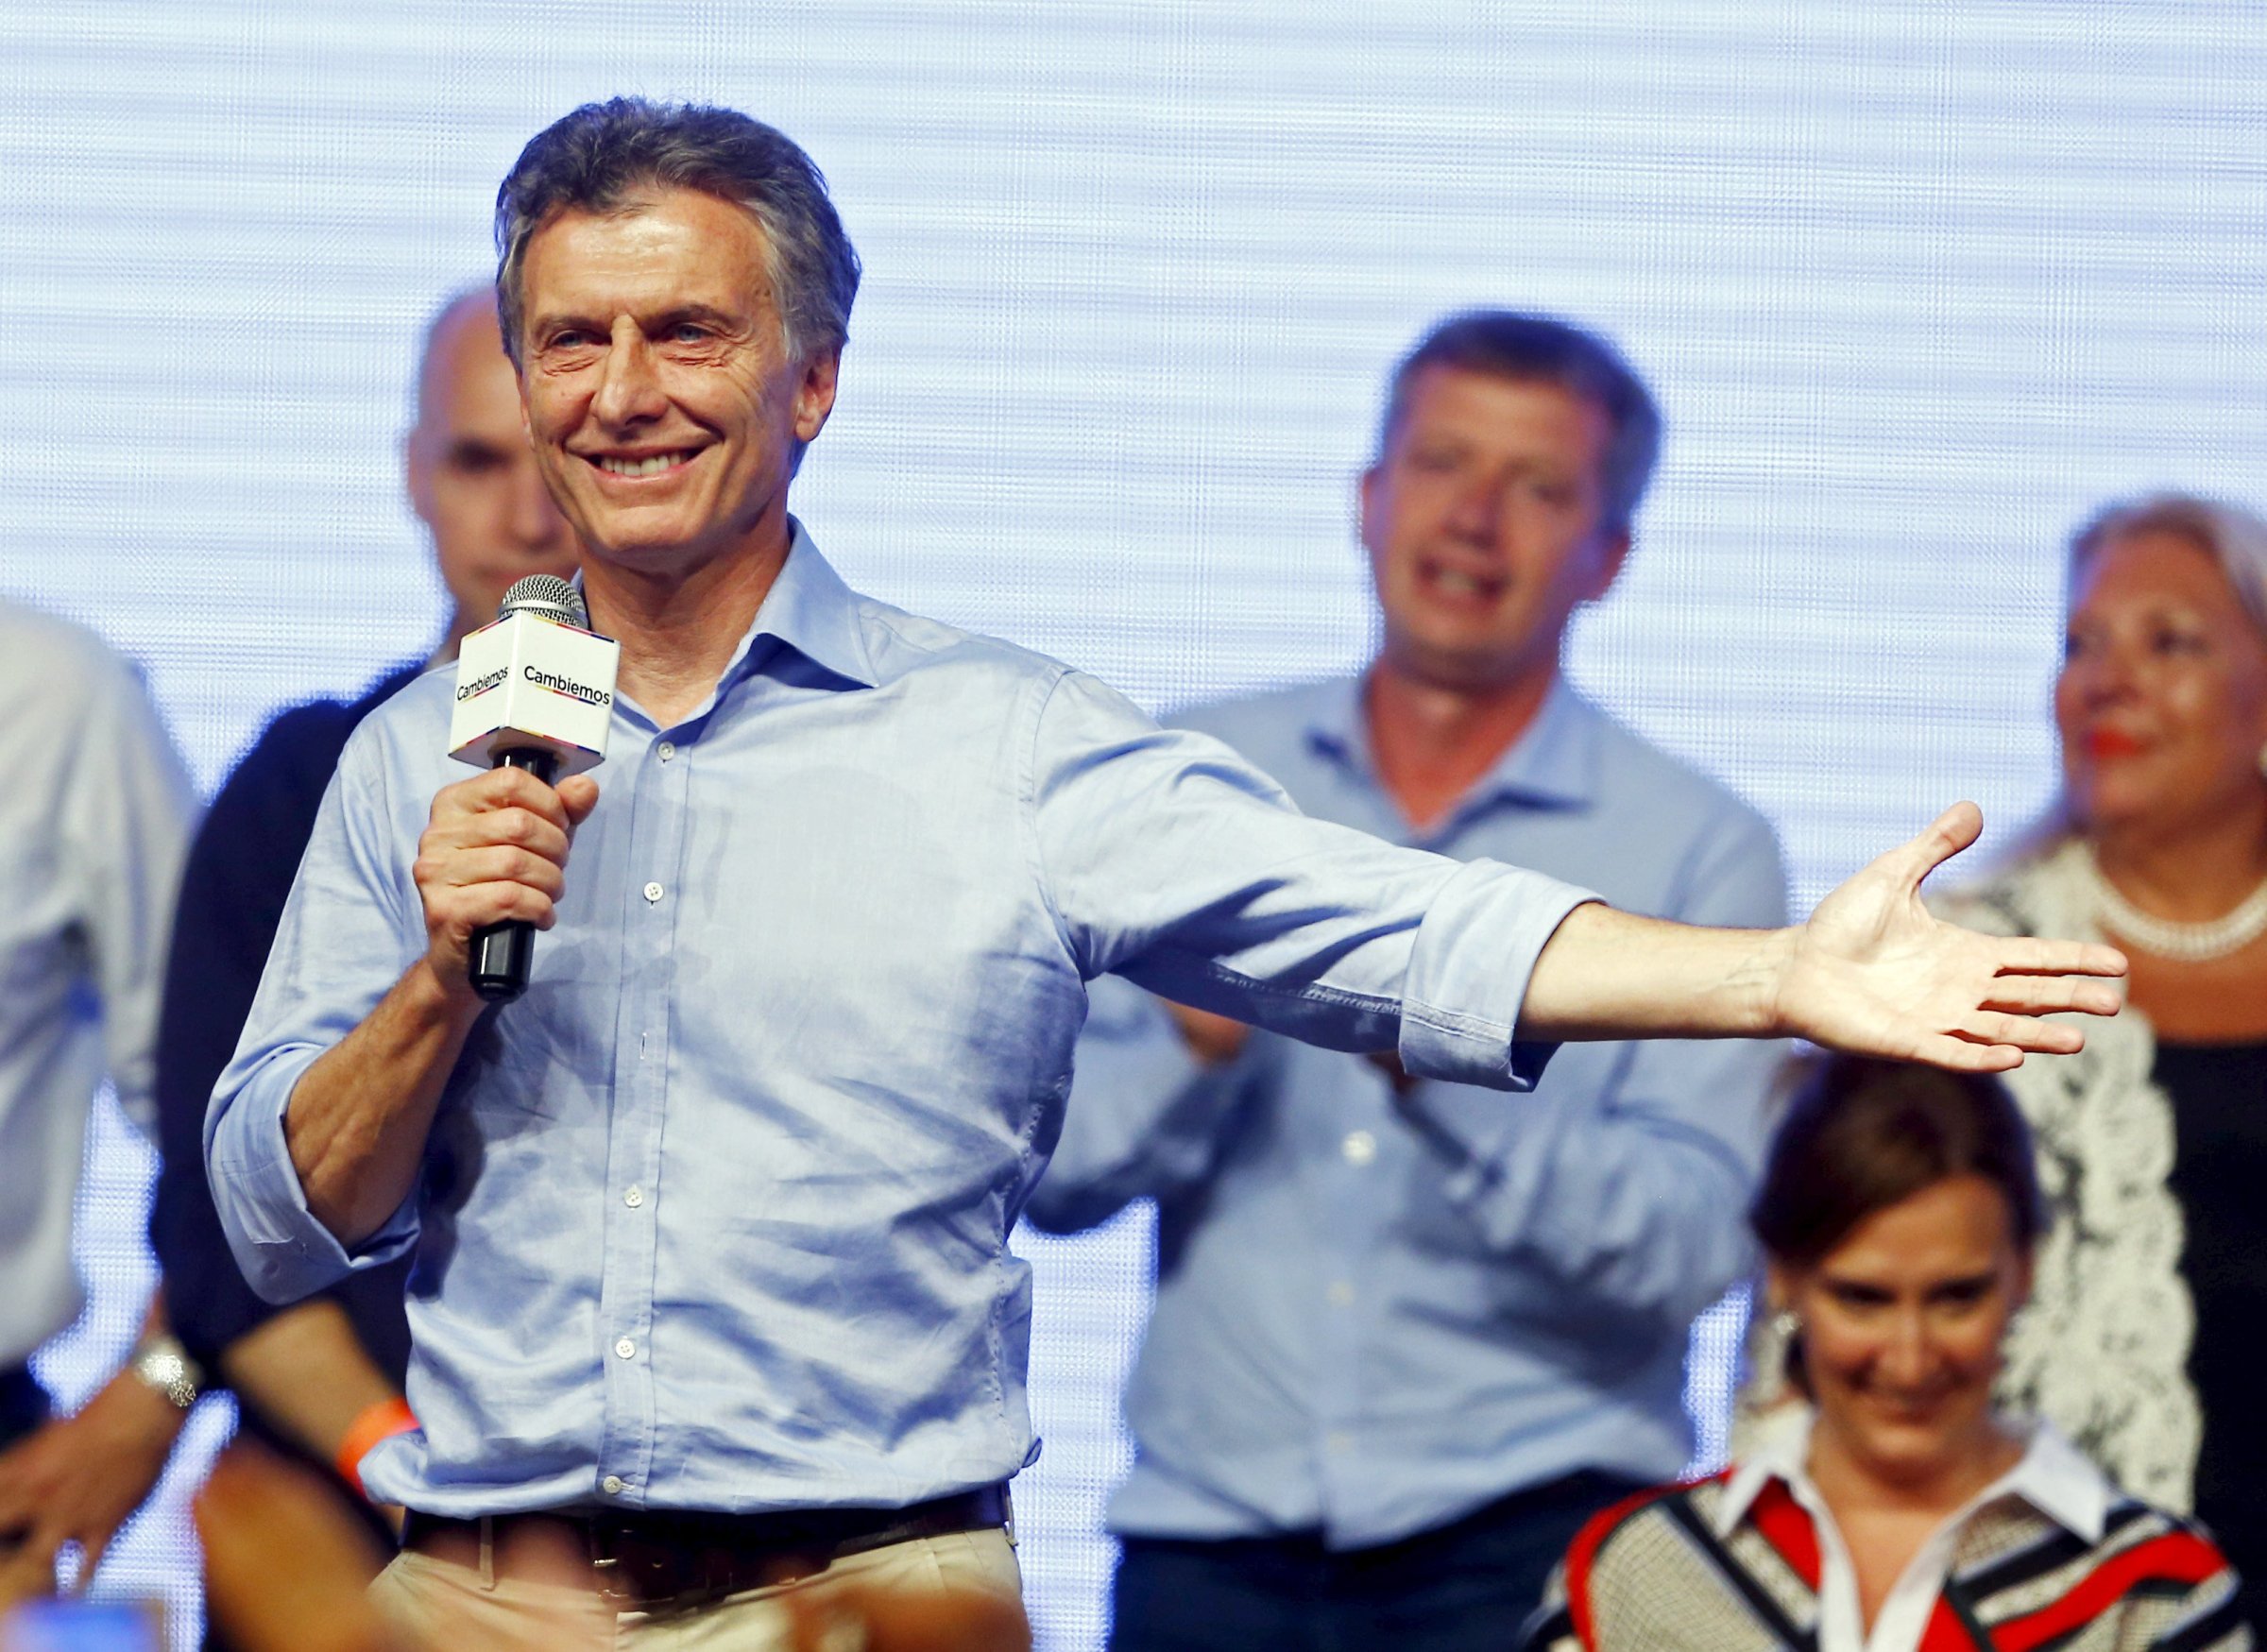 Mauricio Macri, presidential candidate of the Cambiemos coalition, speaks to his supporters after the presidential election in Buenos Aires, Argentina on Nov. 22, 2015.